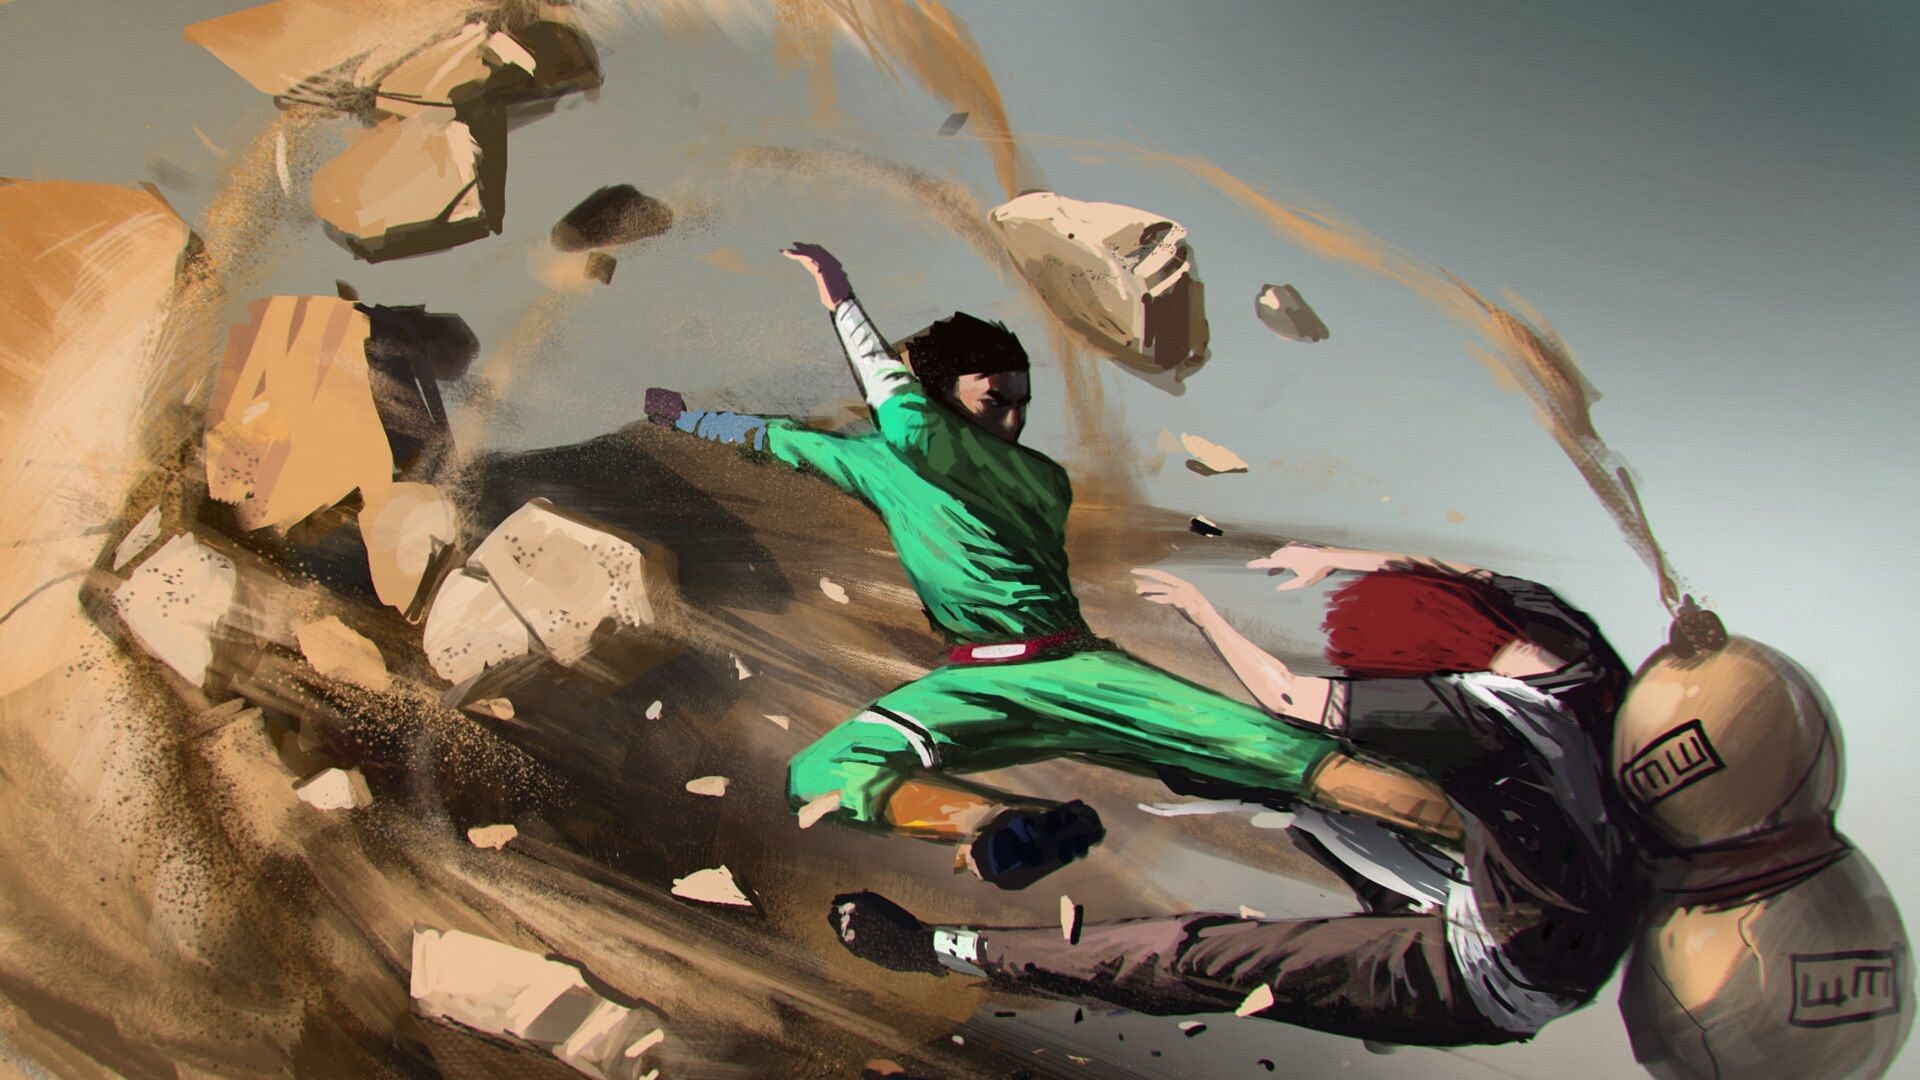 Rock Lee has shown not only remarkable strength but also impressive determination in his fight against Gaara (Image via Masashi Kishimoto/Shueisha/Studio Pierrot, Naruto)